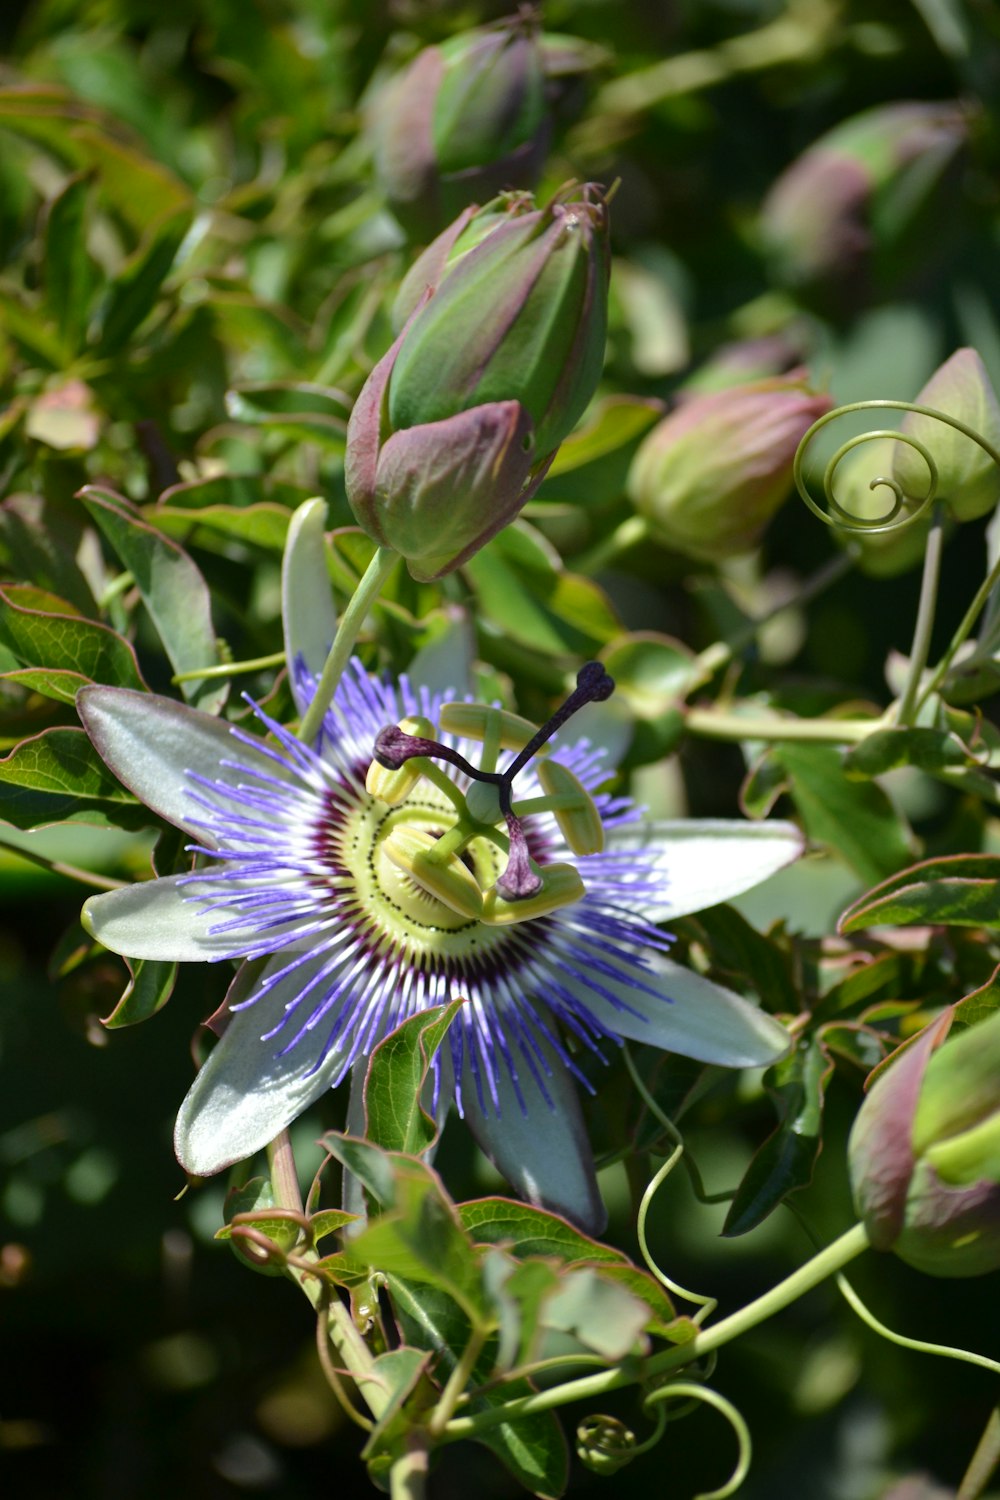 a purple flower with a green center surrounded by leaves